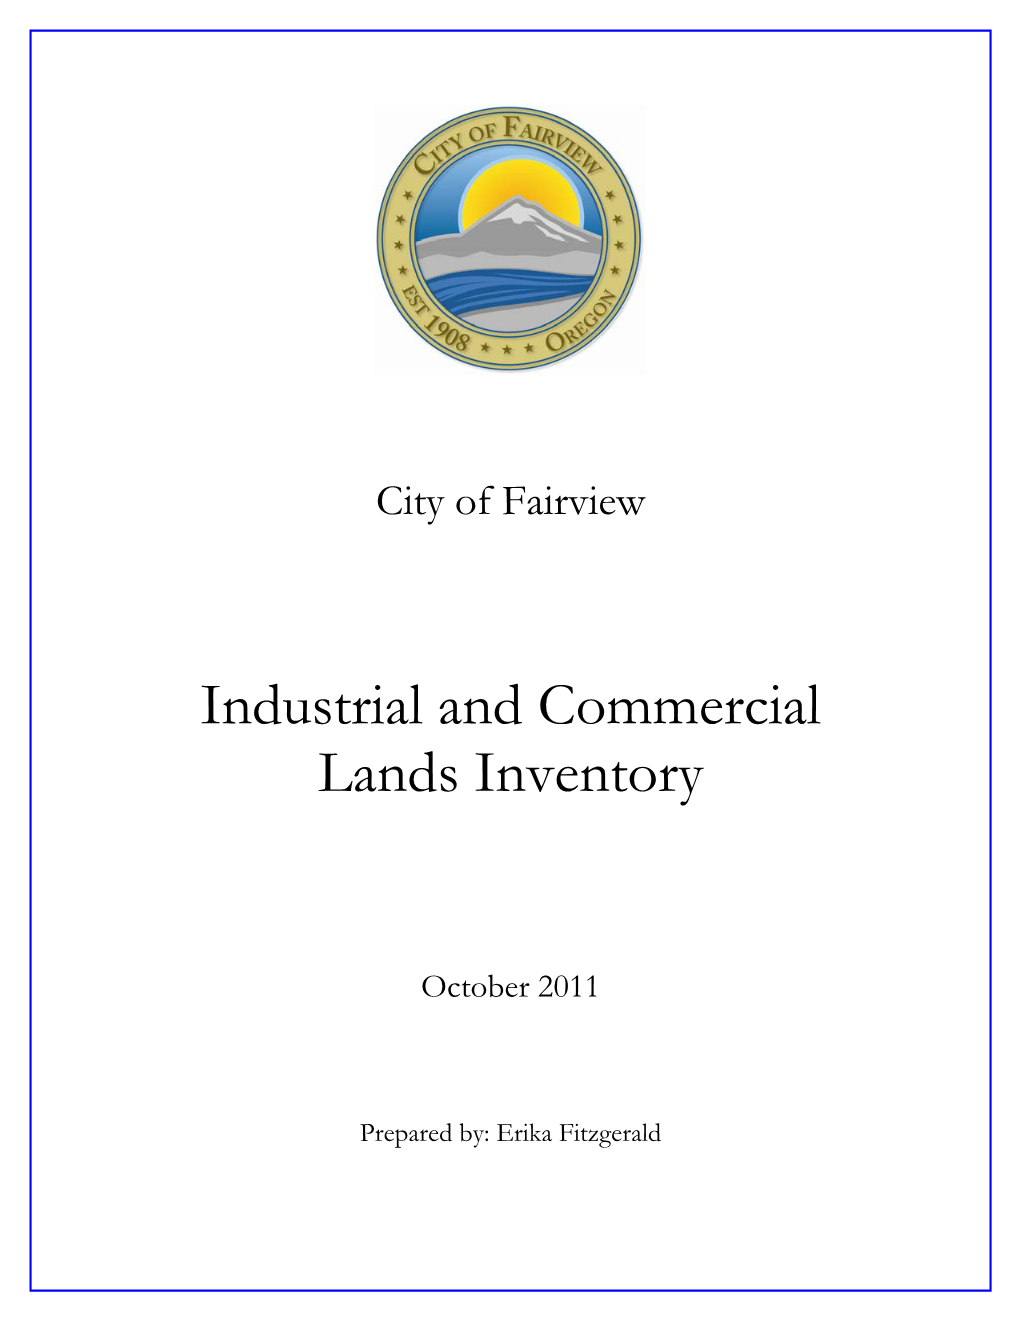 Industrial and Commercial Lands Inventory